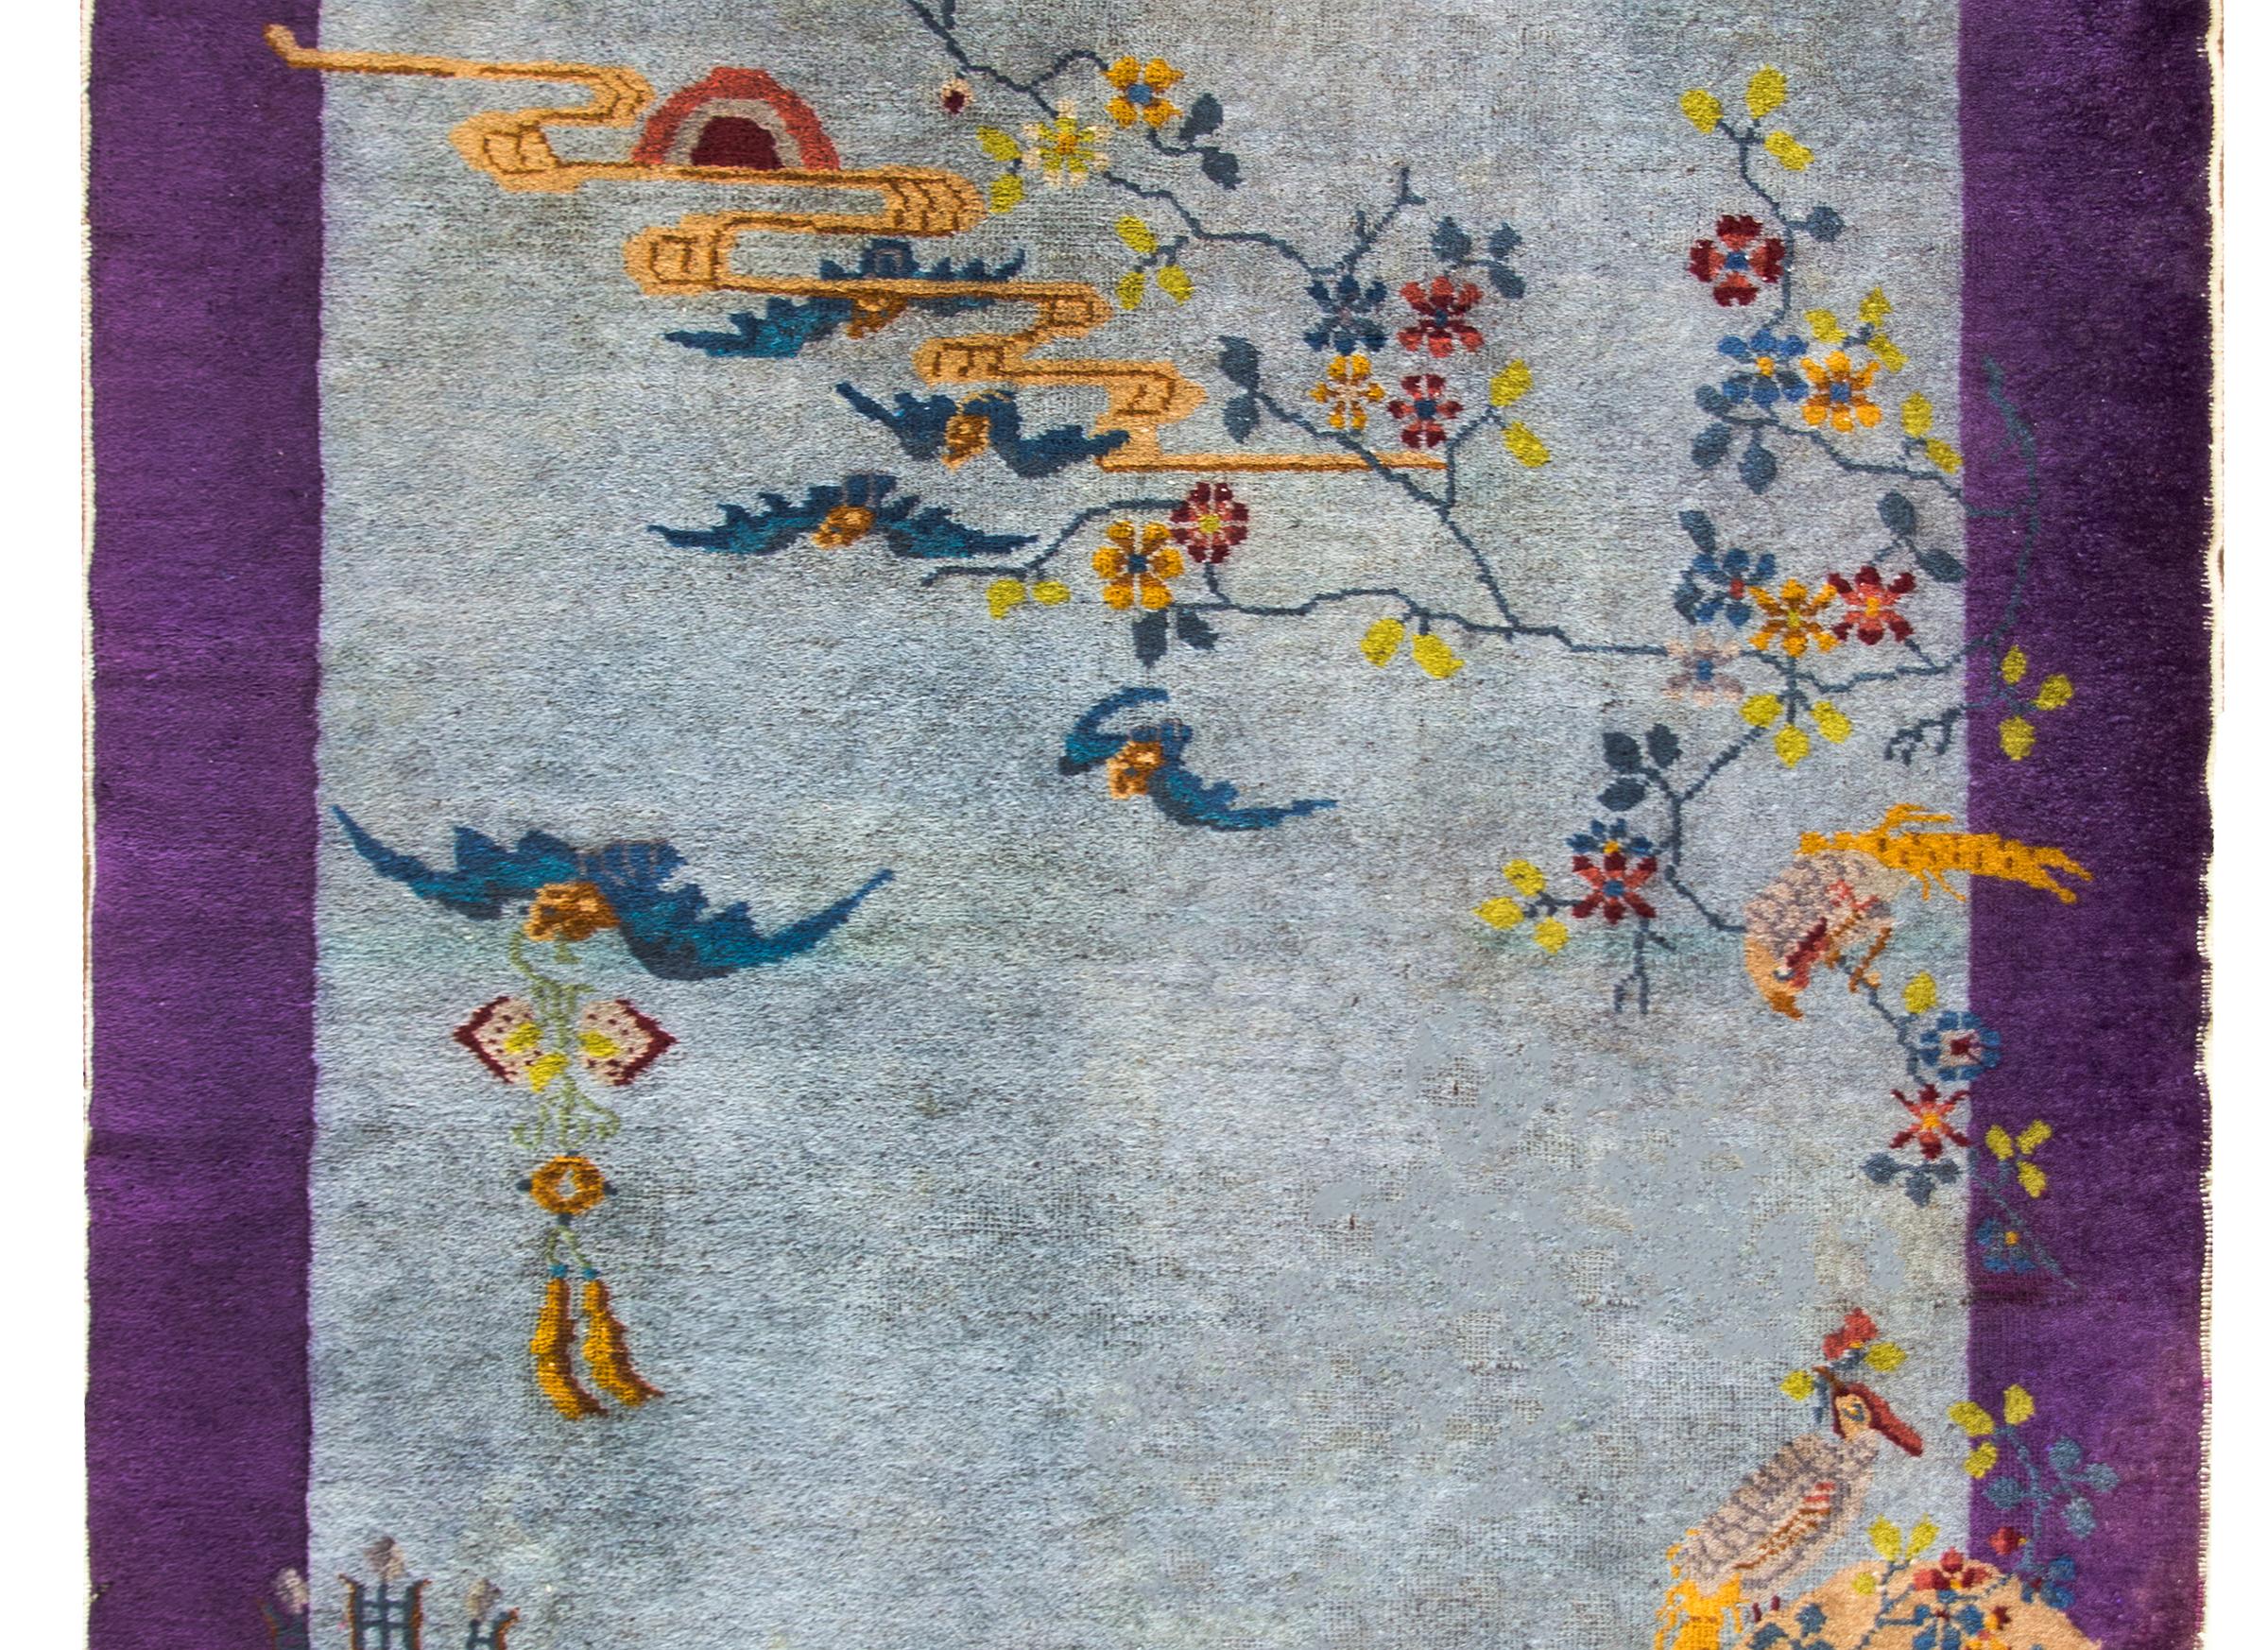 A beautiful early 20th century Chinese Art Deco rug with myriad auspicious imagery including five bats, a phoenix, fish, a scholar's vase, and various flowers, all symbols of prosperity, good fortune, and long life.  